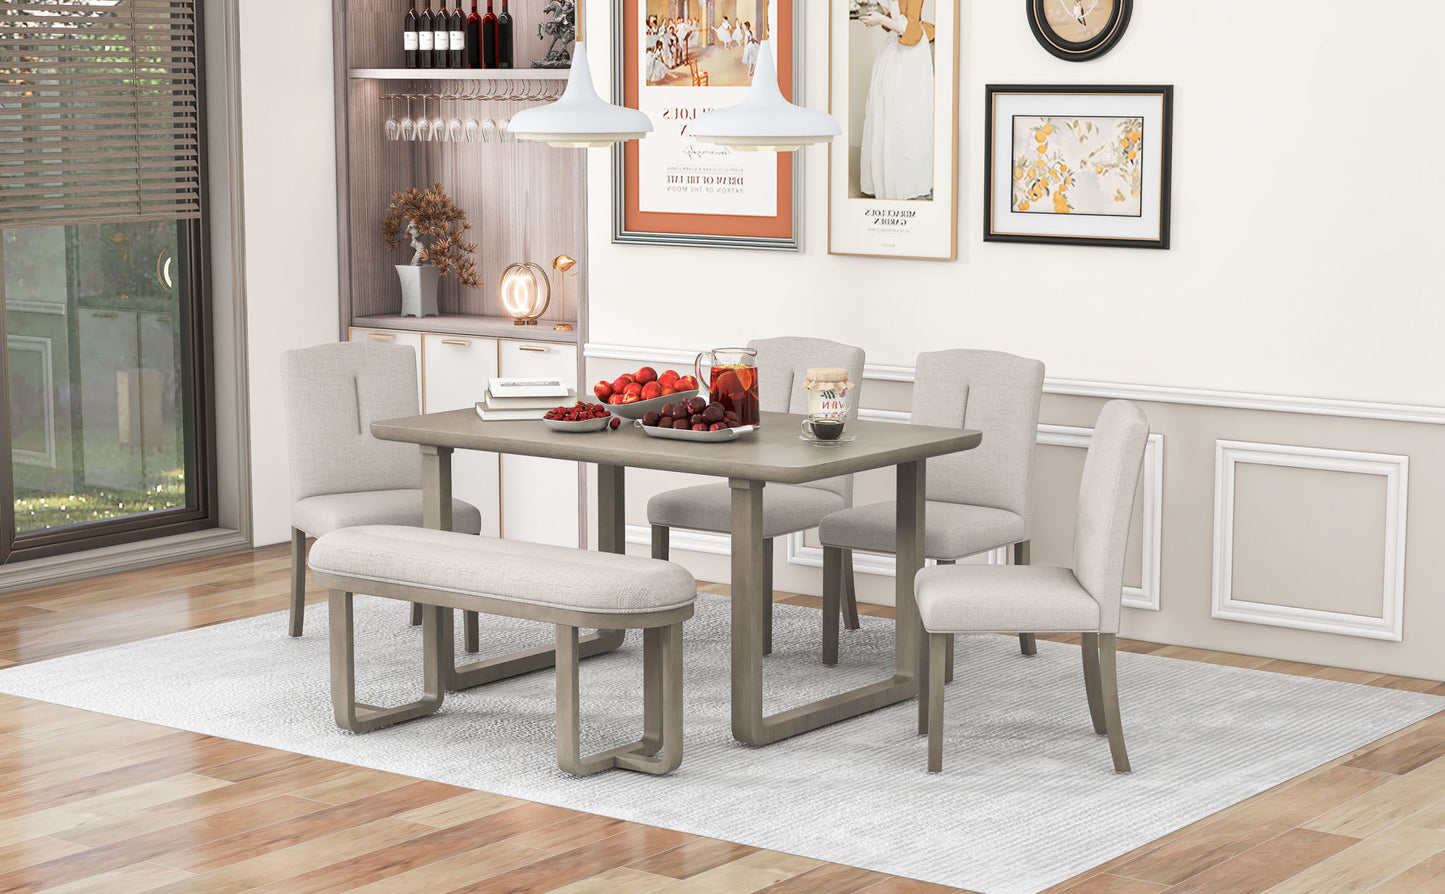 6-Piece Retro-Style Dining Set Includes Dining Table, 4 Upholstered Chairs & Bench with Foam-covered Seat Backs & Cushions for Dining Room (Light Khaki+Beige)